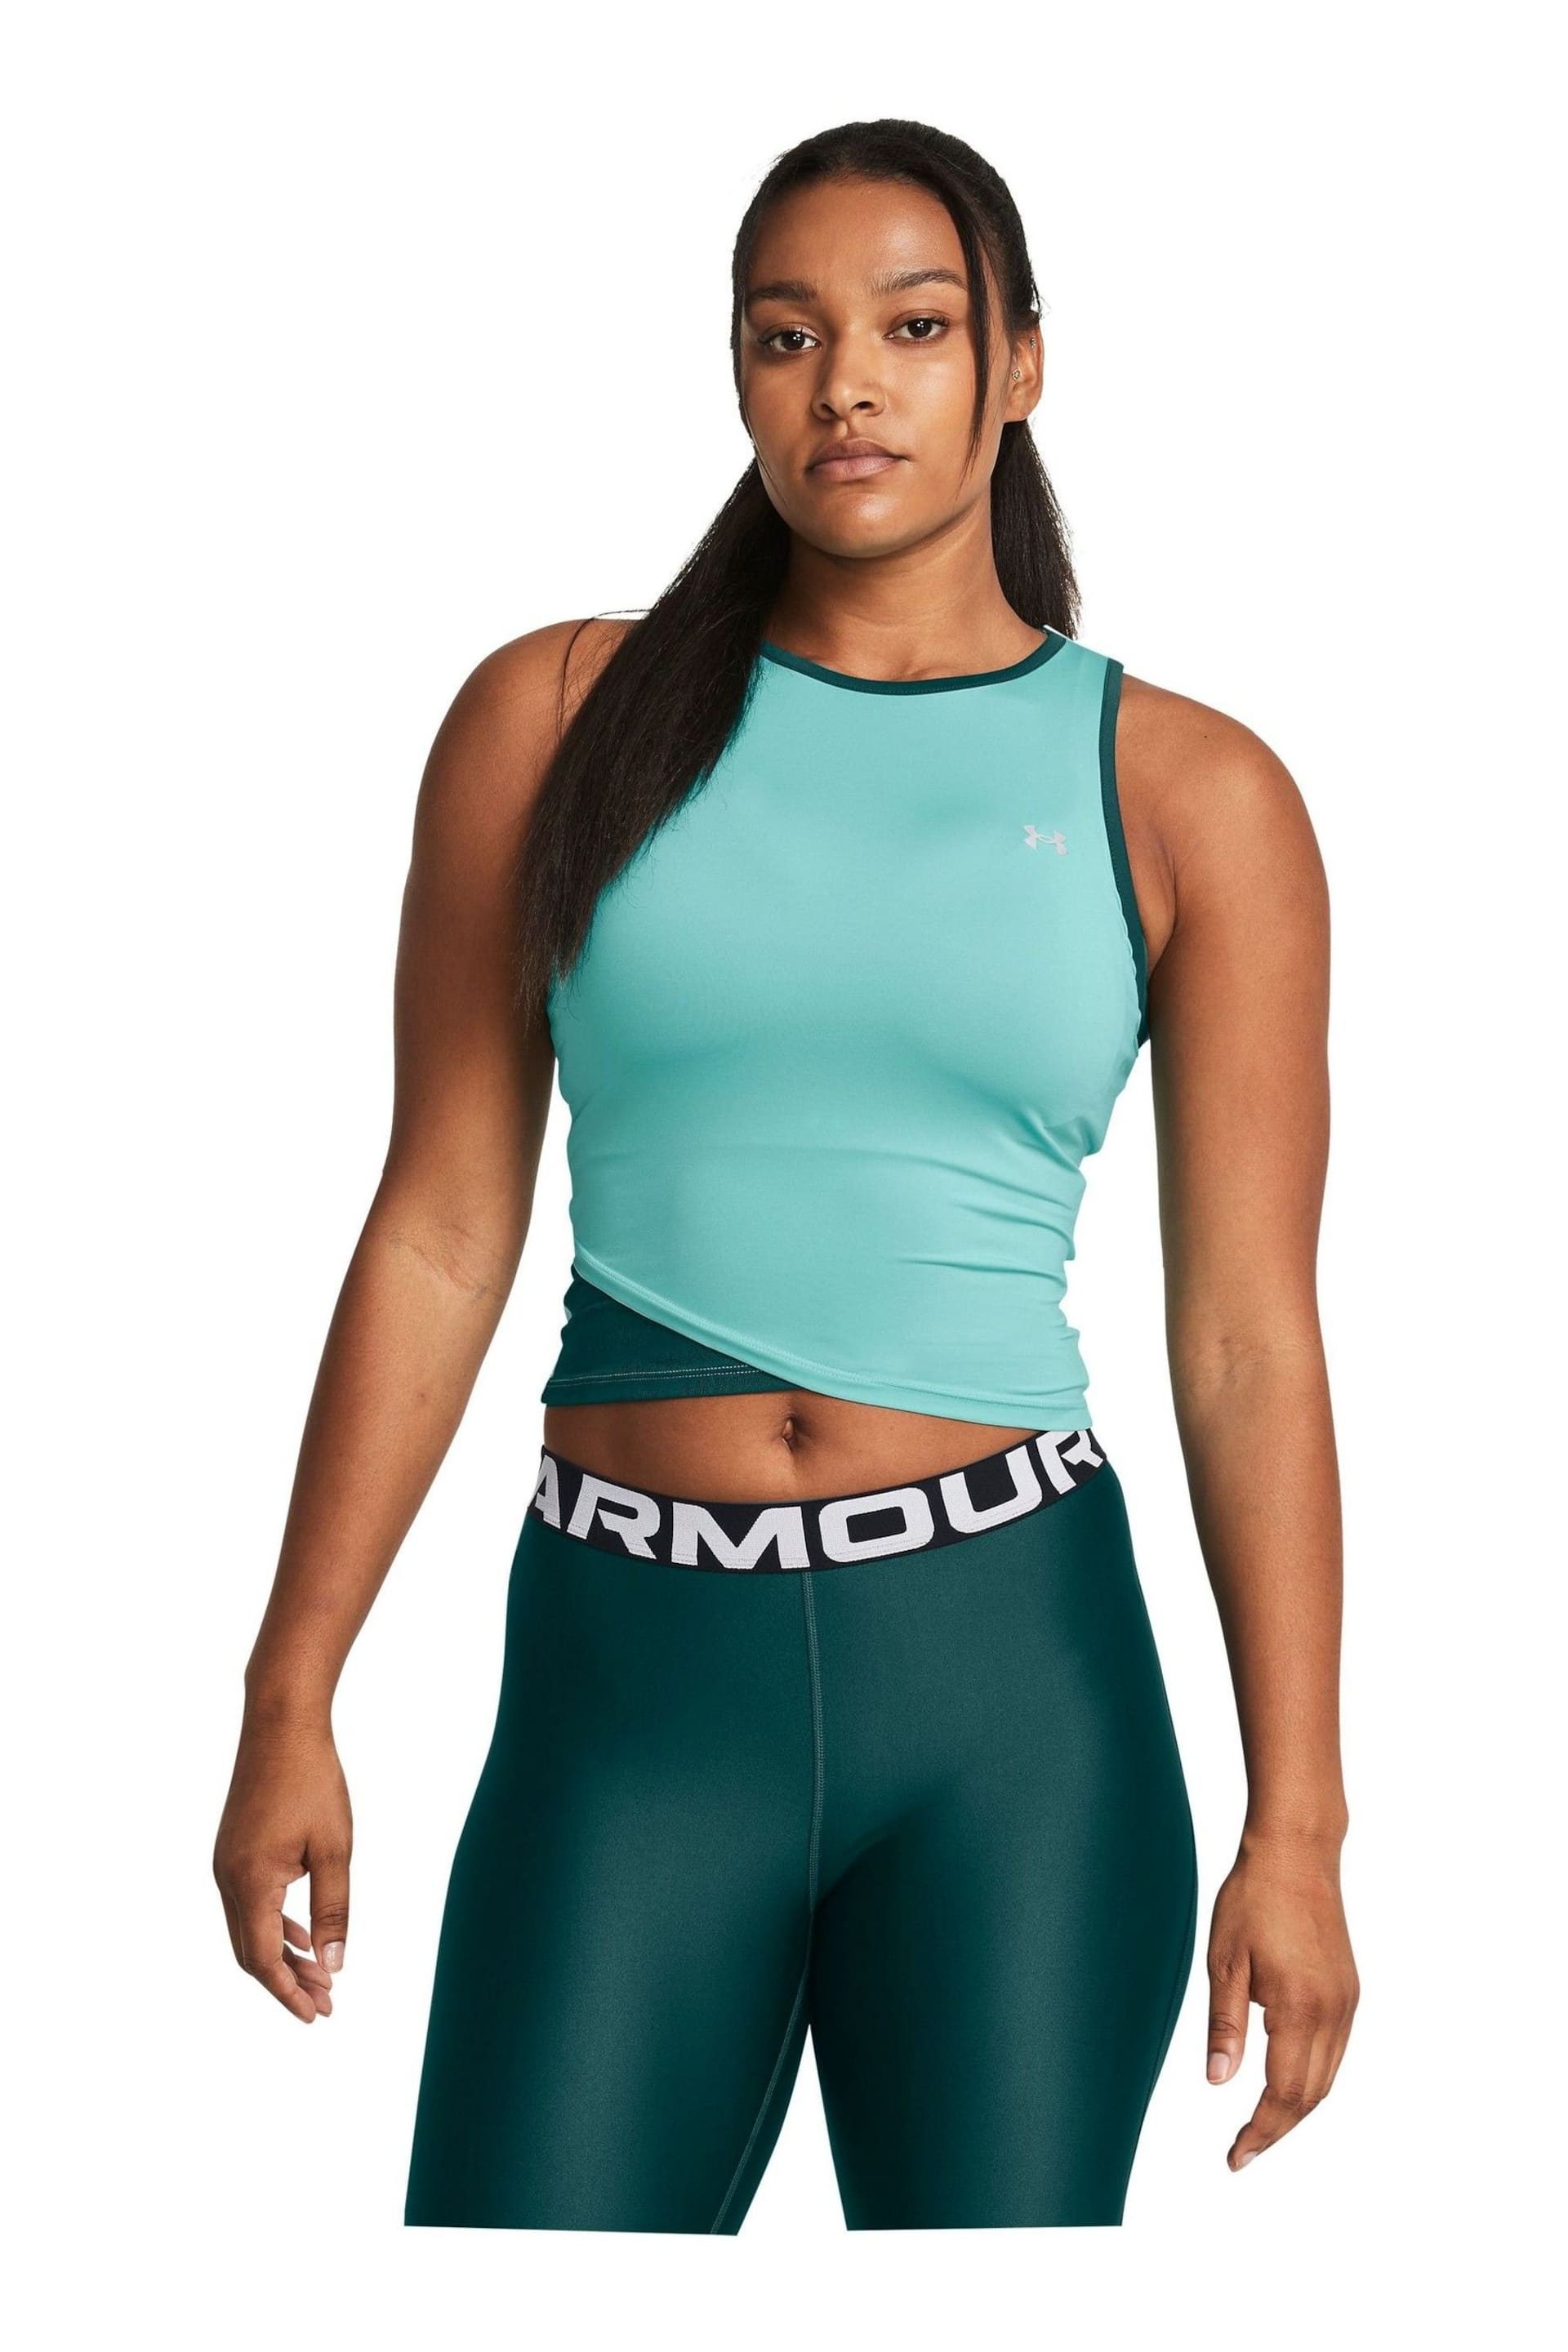 Under Armour Green Womens Heat Gear Authentics Leggings - Image 4 of 8